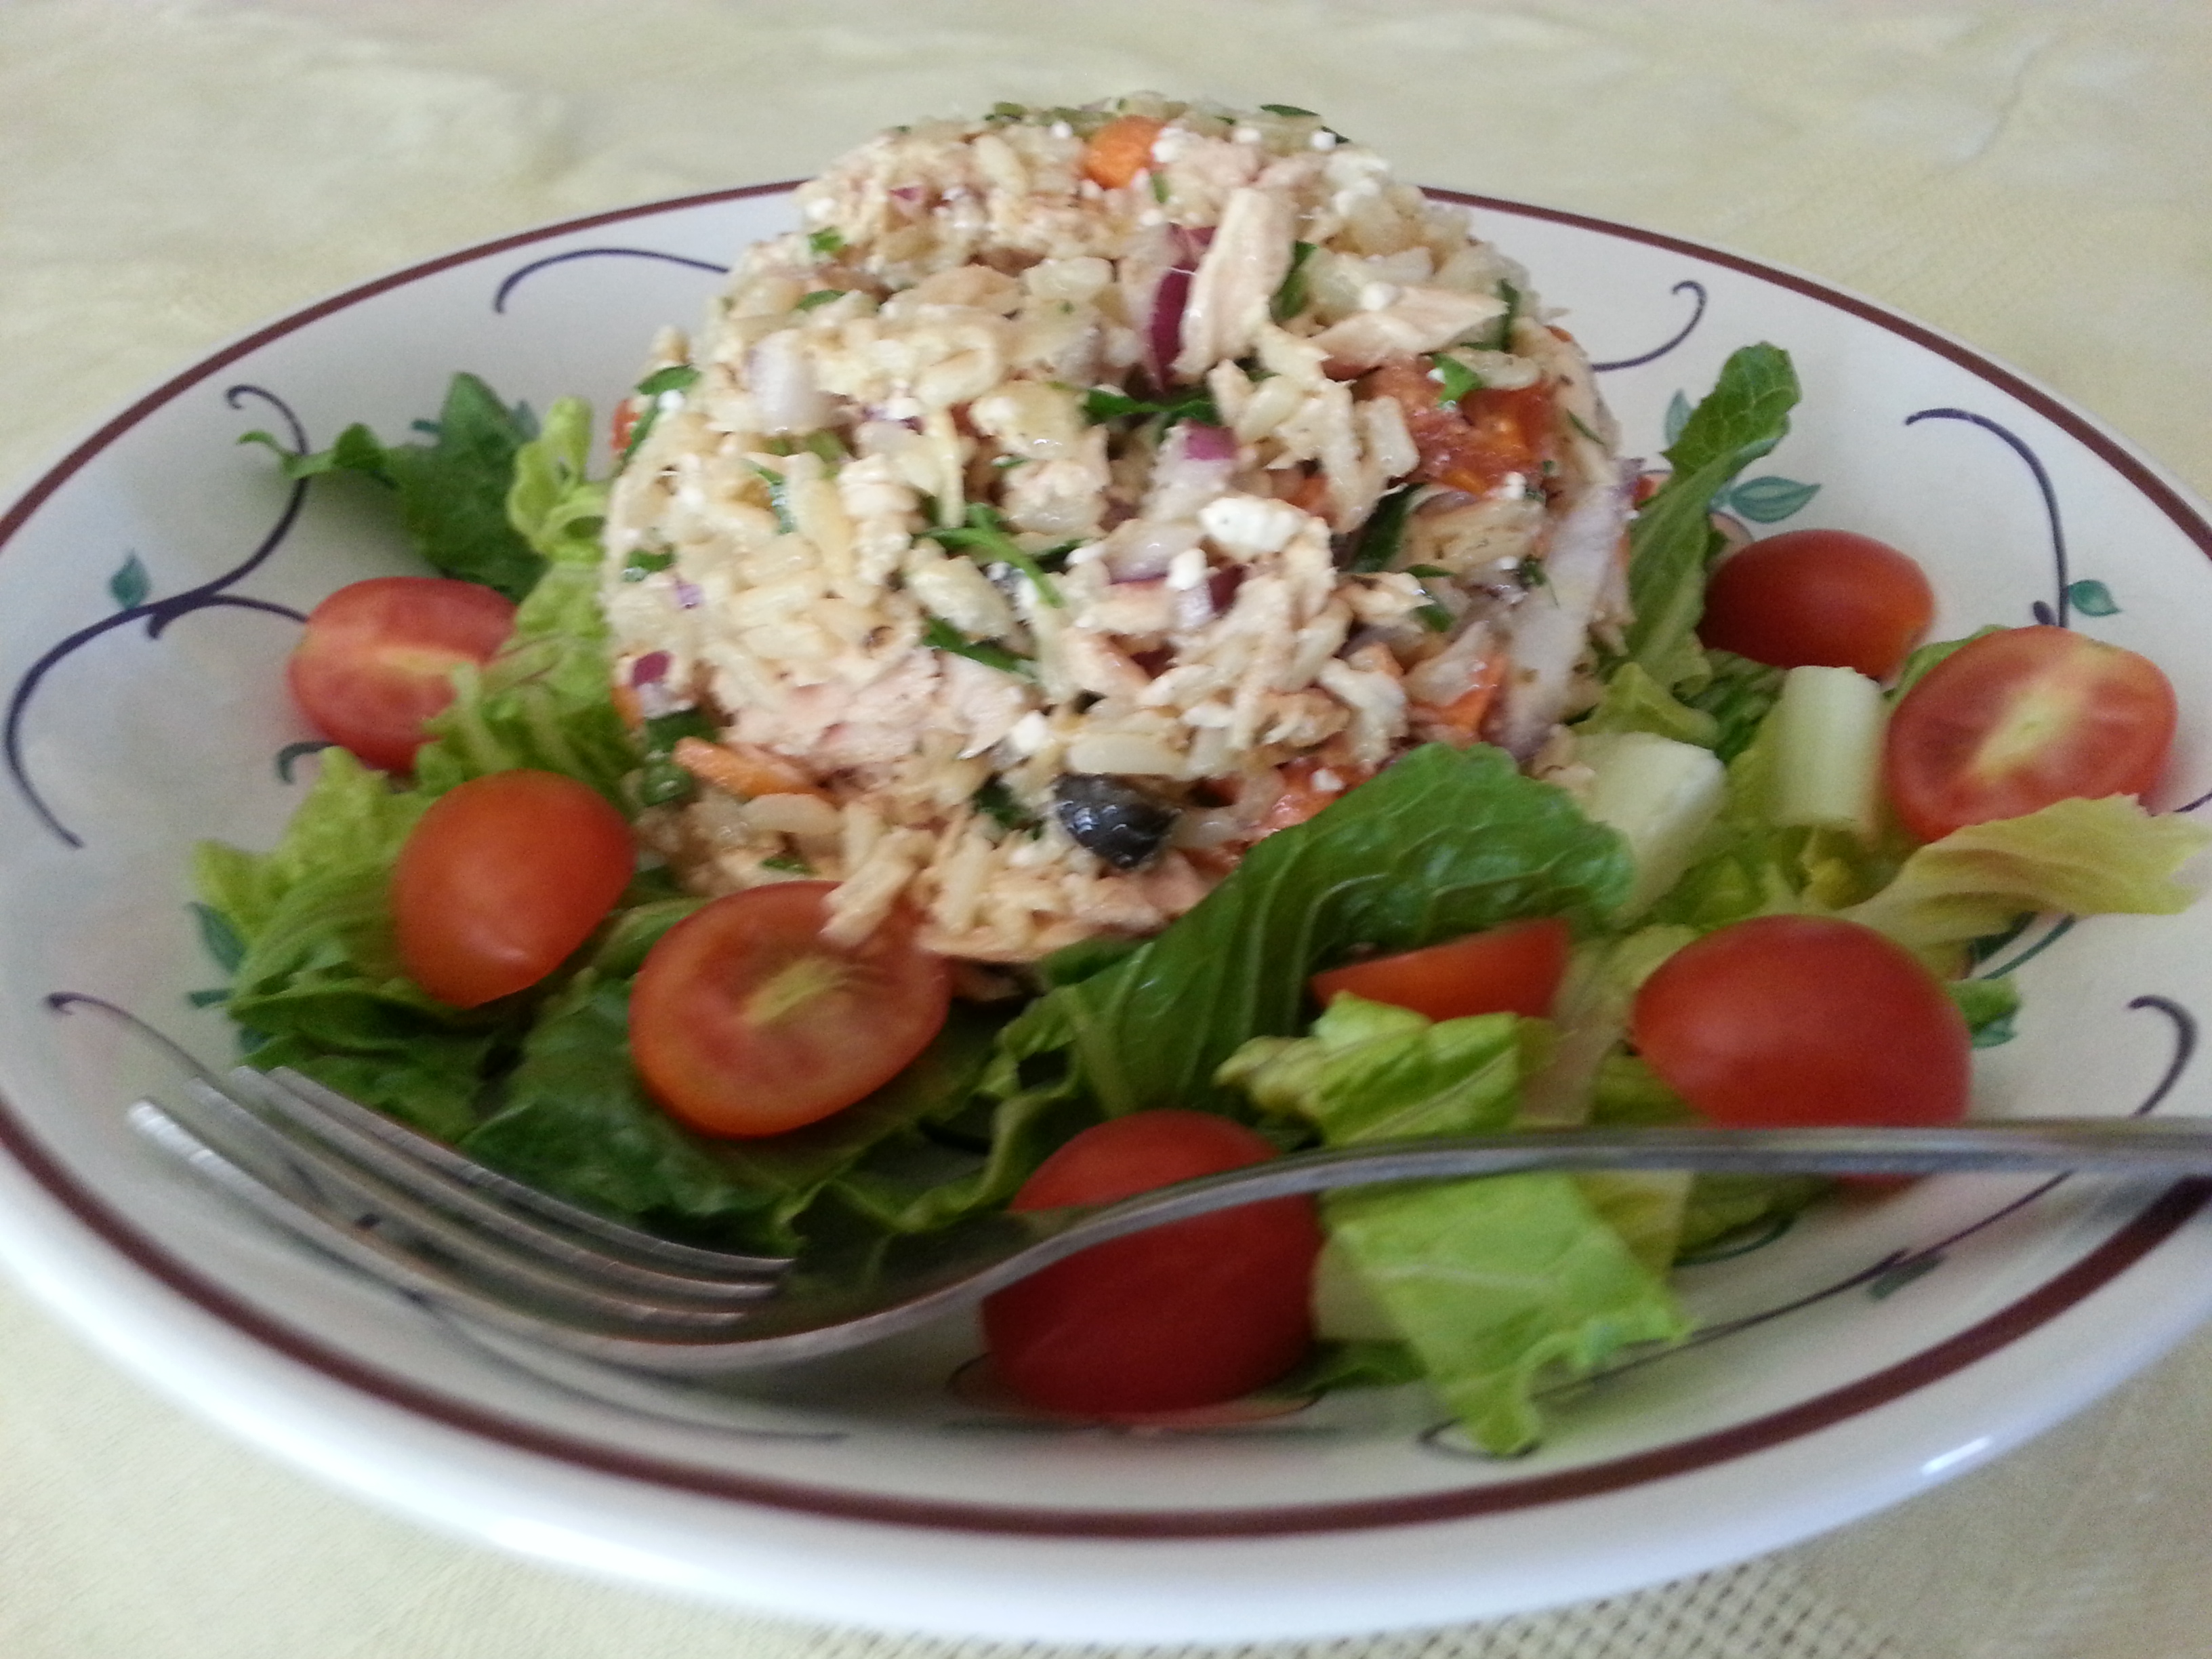 A New Take on Salad . . .  With Brown Rice